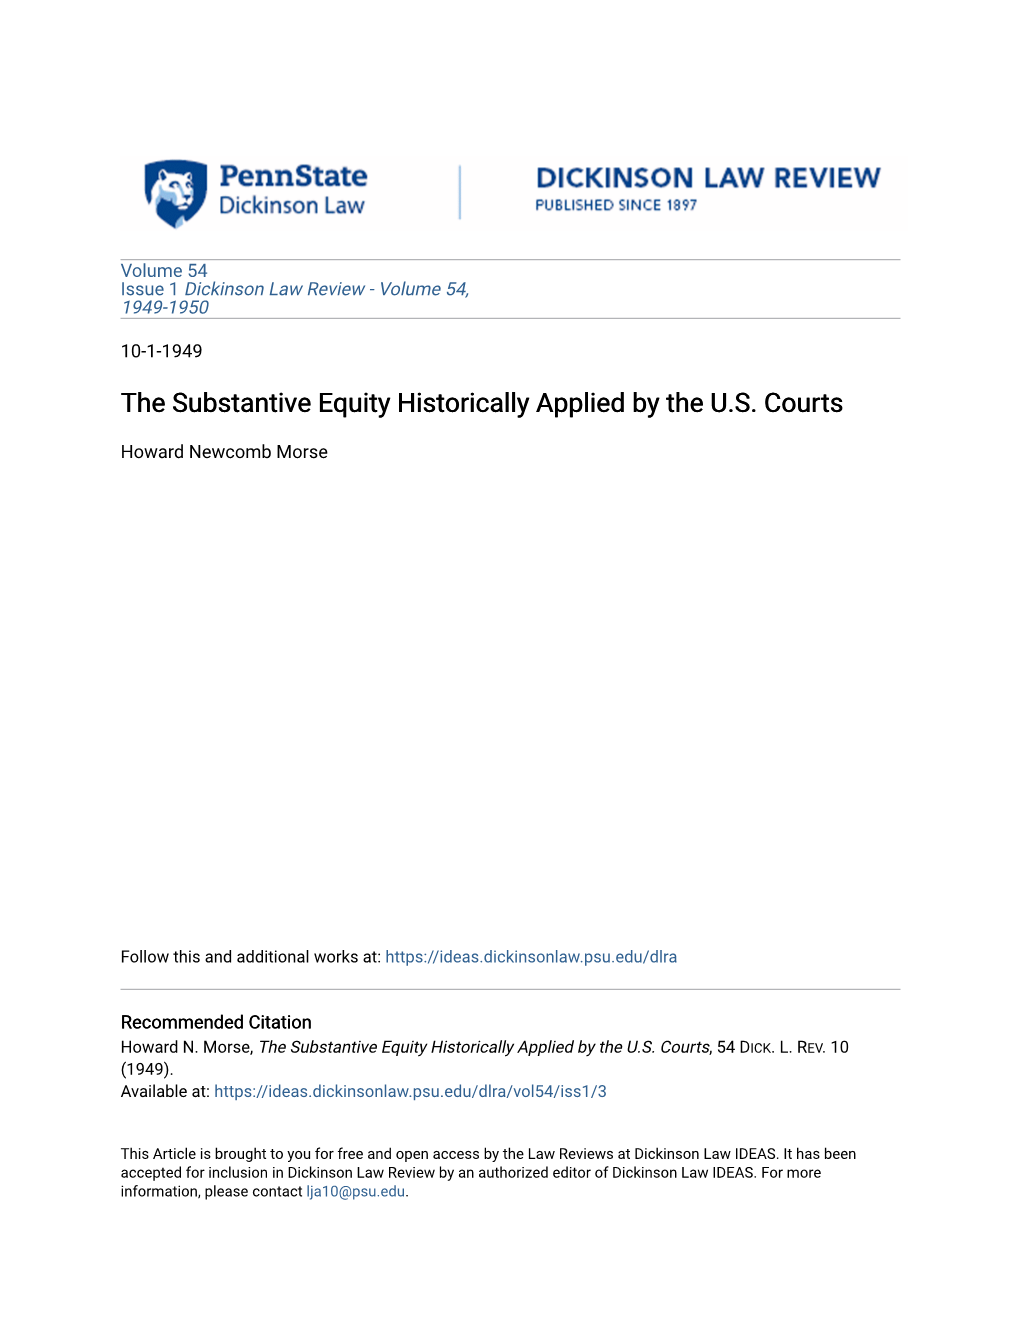 The Substantive Equity Historically Applied by the U.S. Courts